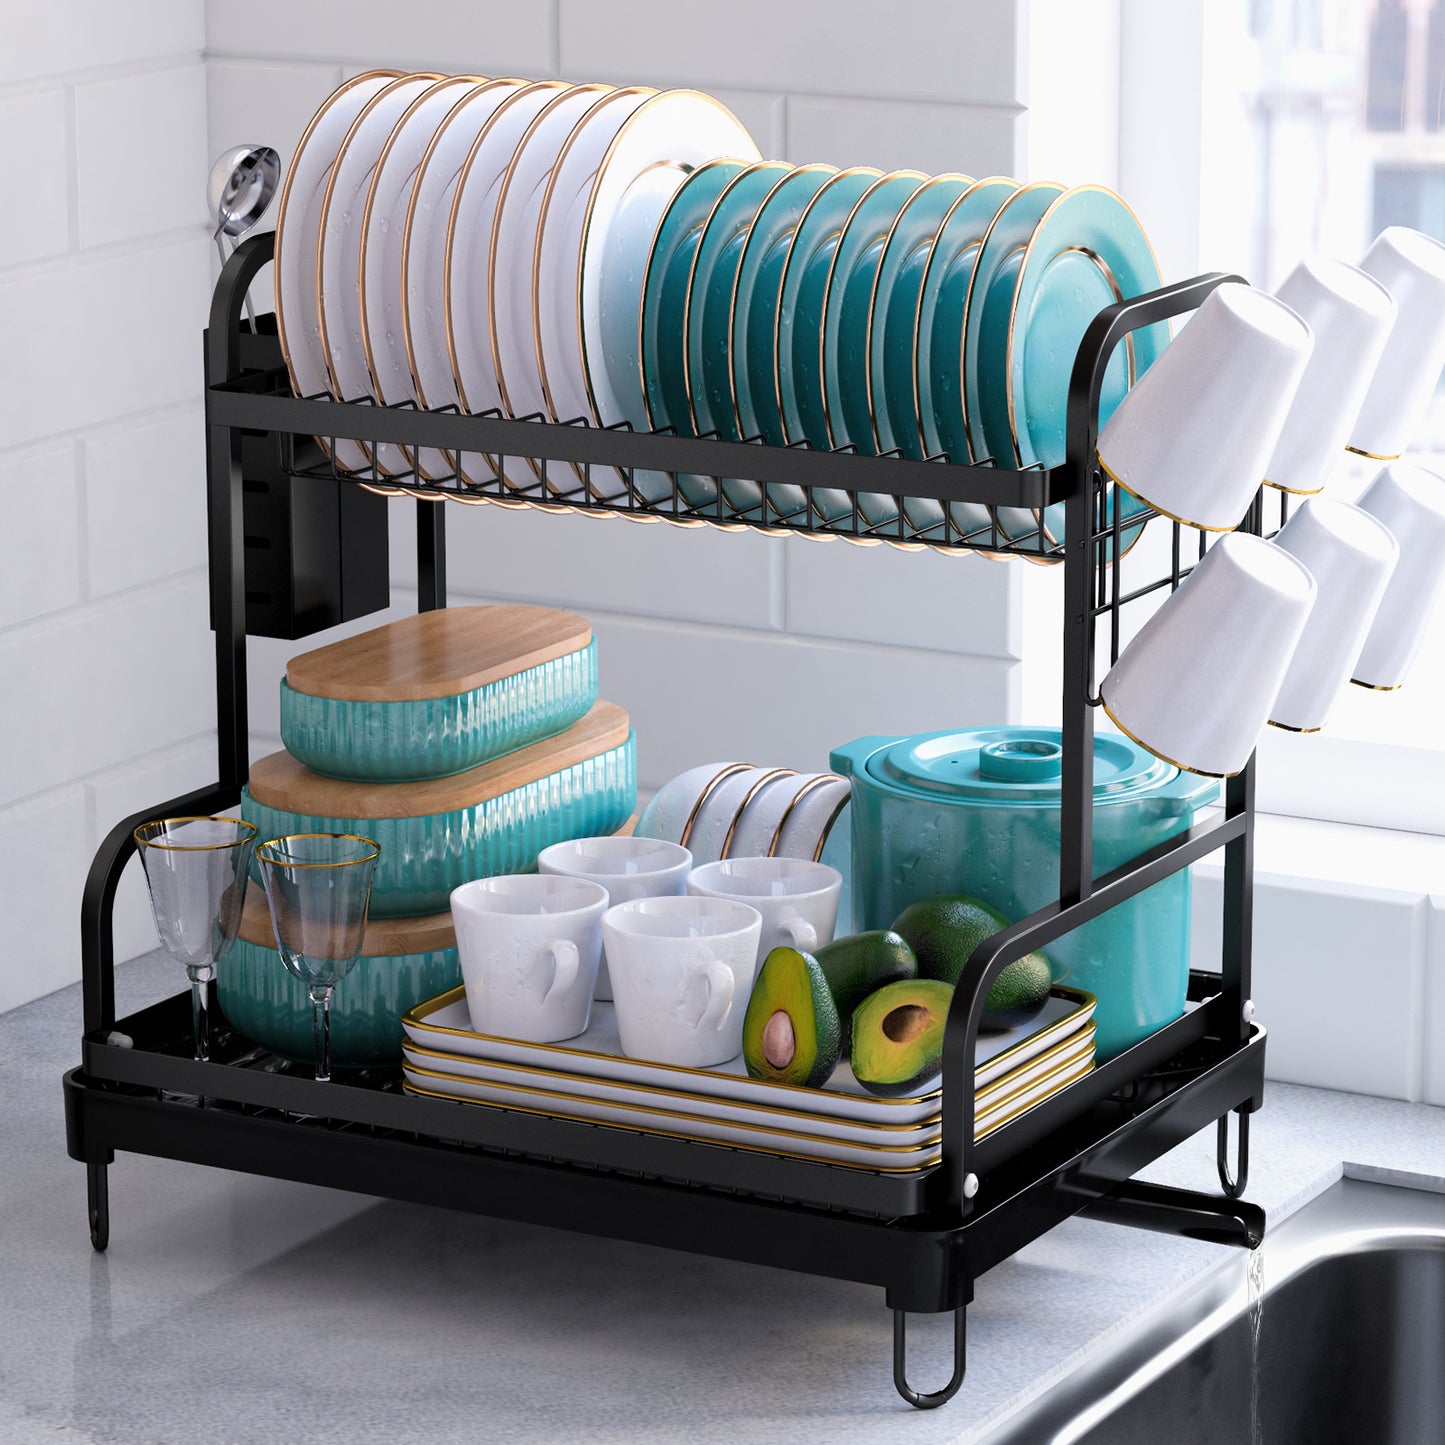 Large 2-Tier Dish Rack with Wine Glass Holder, Utensil Holder and